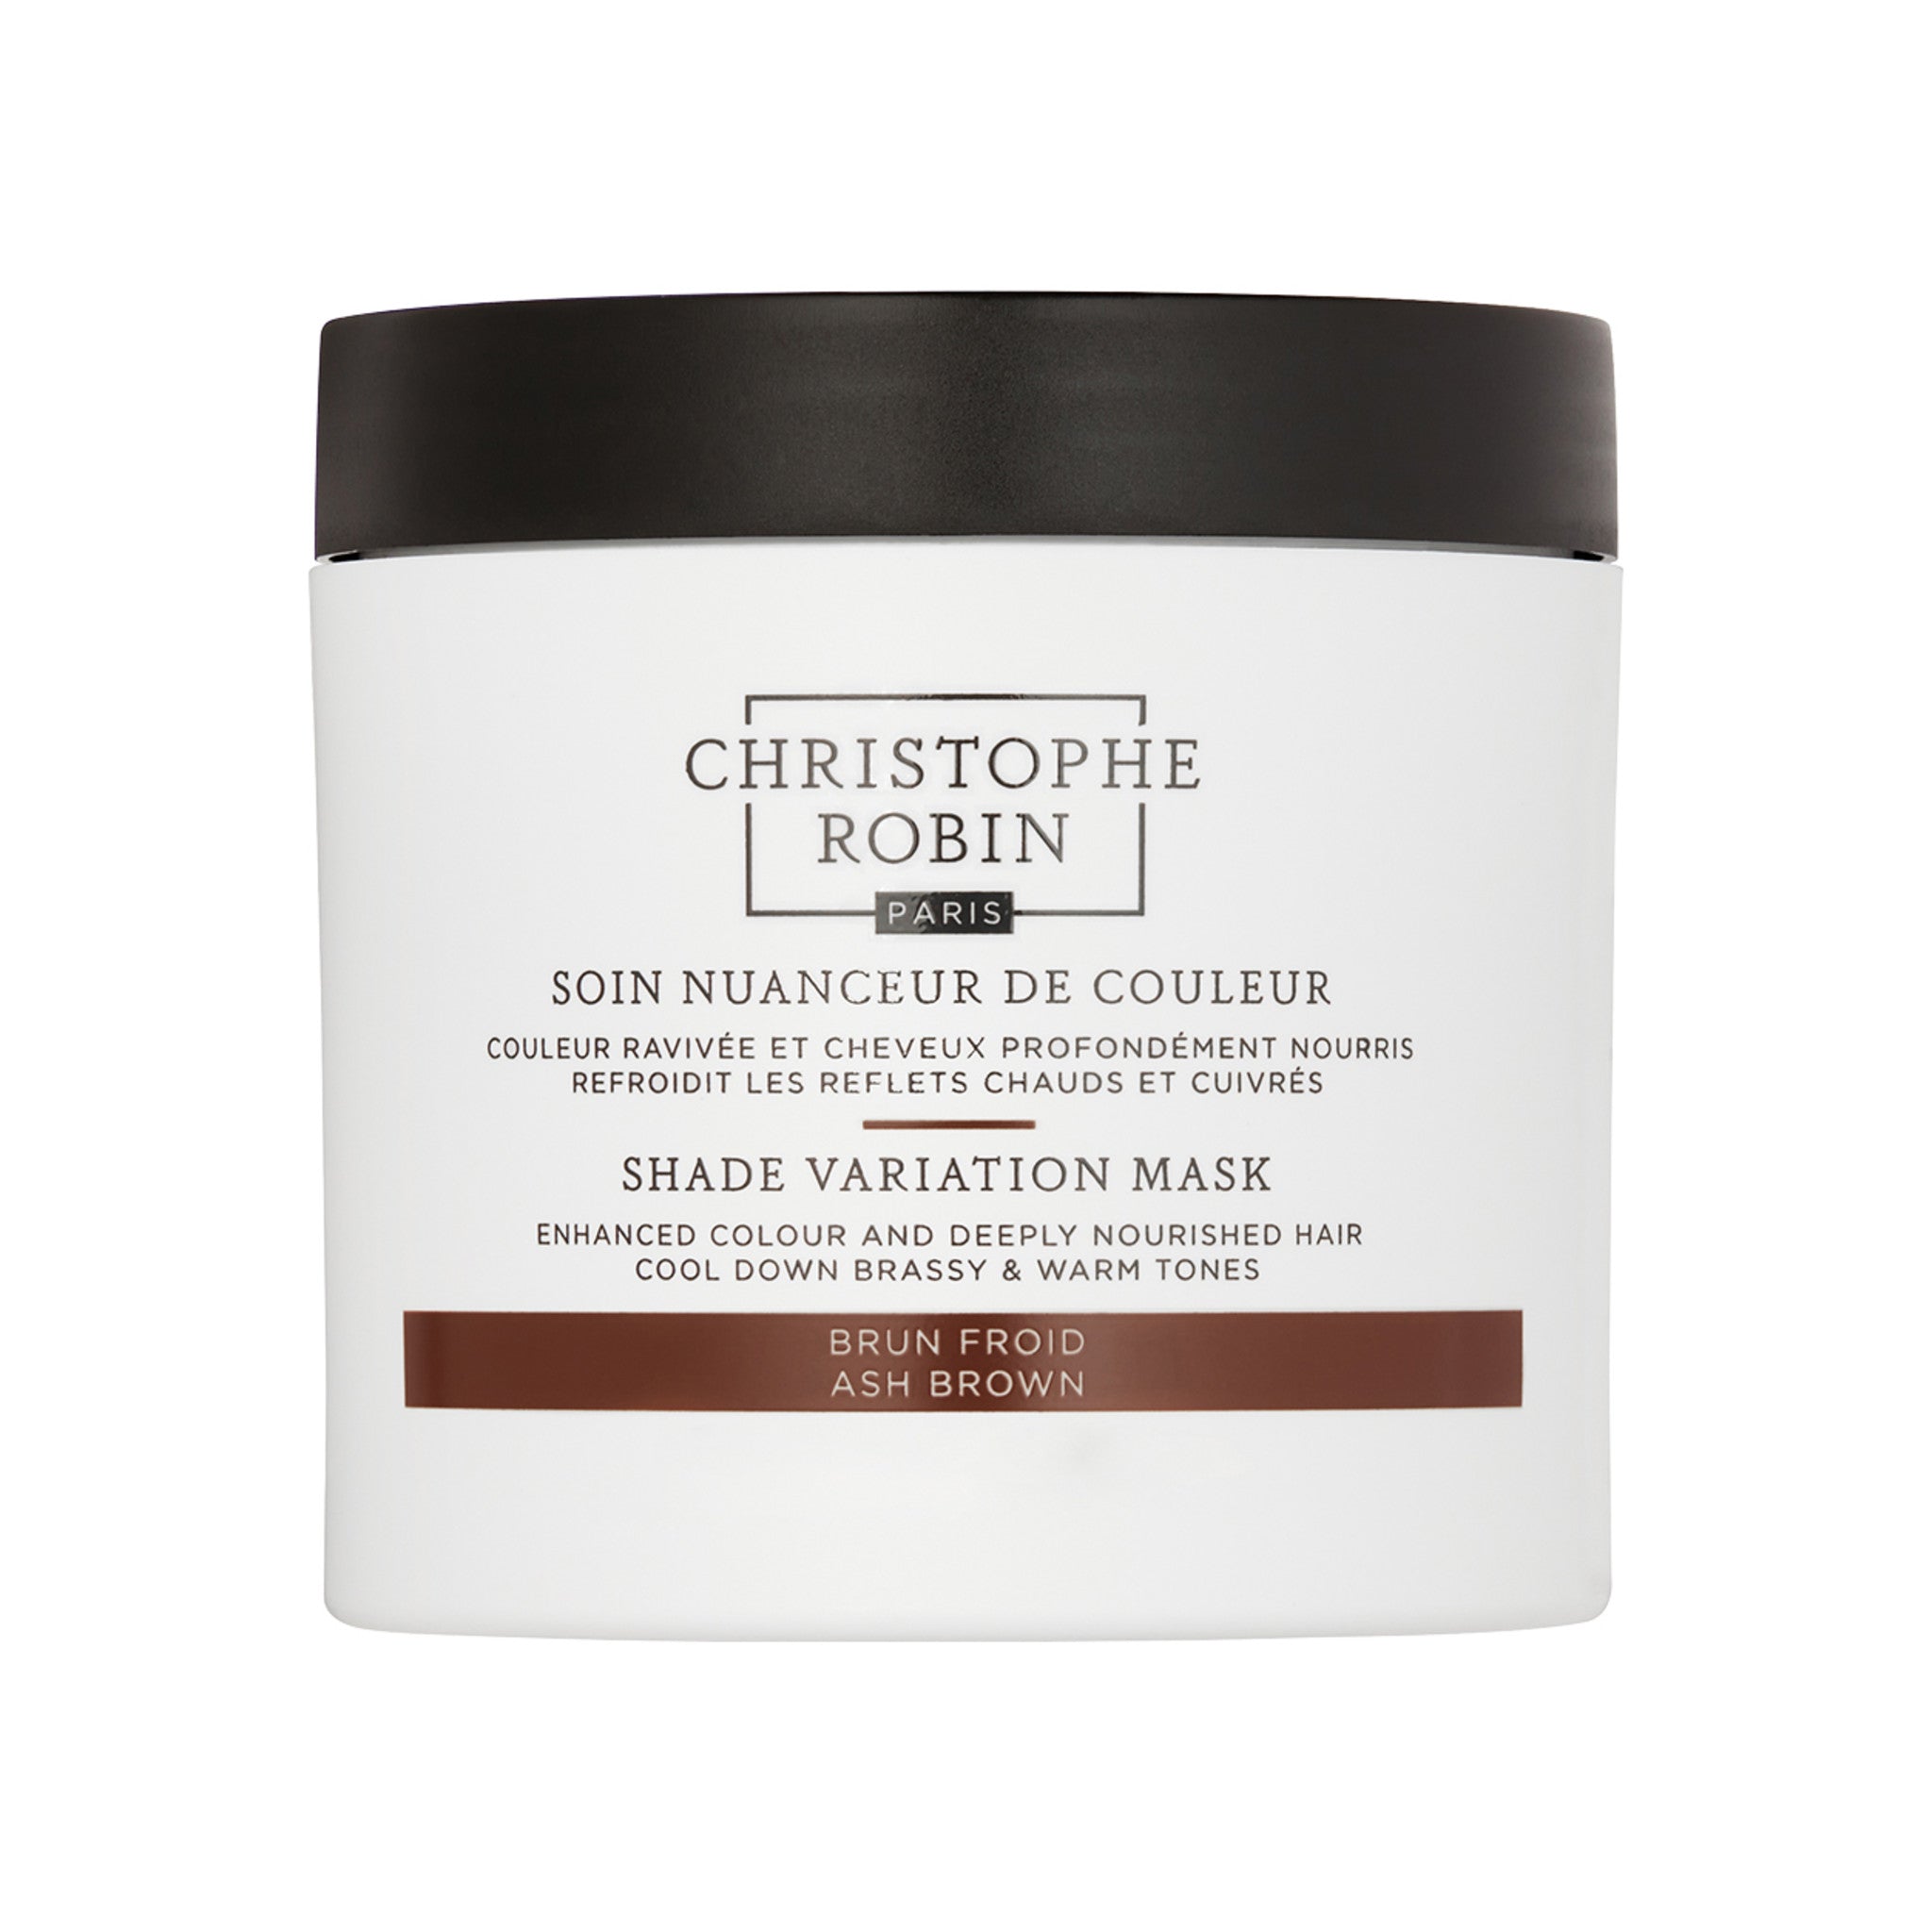 Christophe Robin Shade Variation Mask Ash Brown main image. This product is for blonde hair